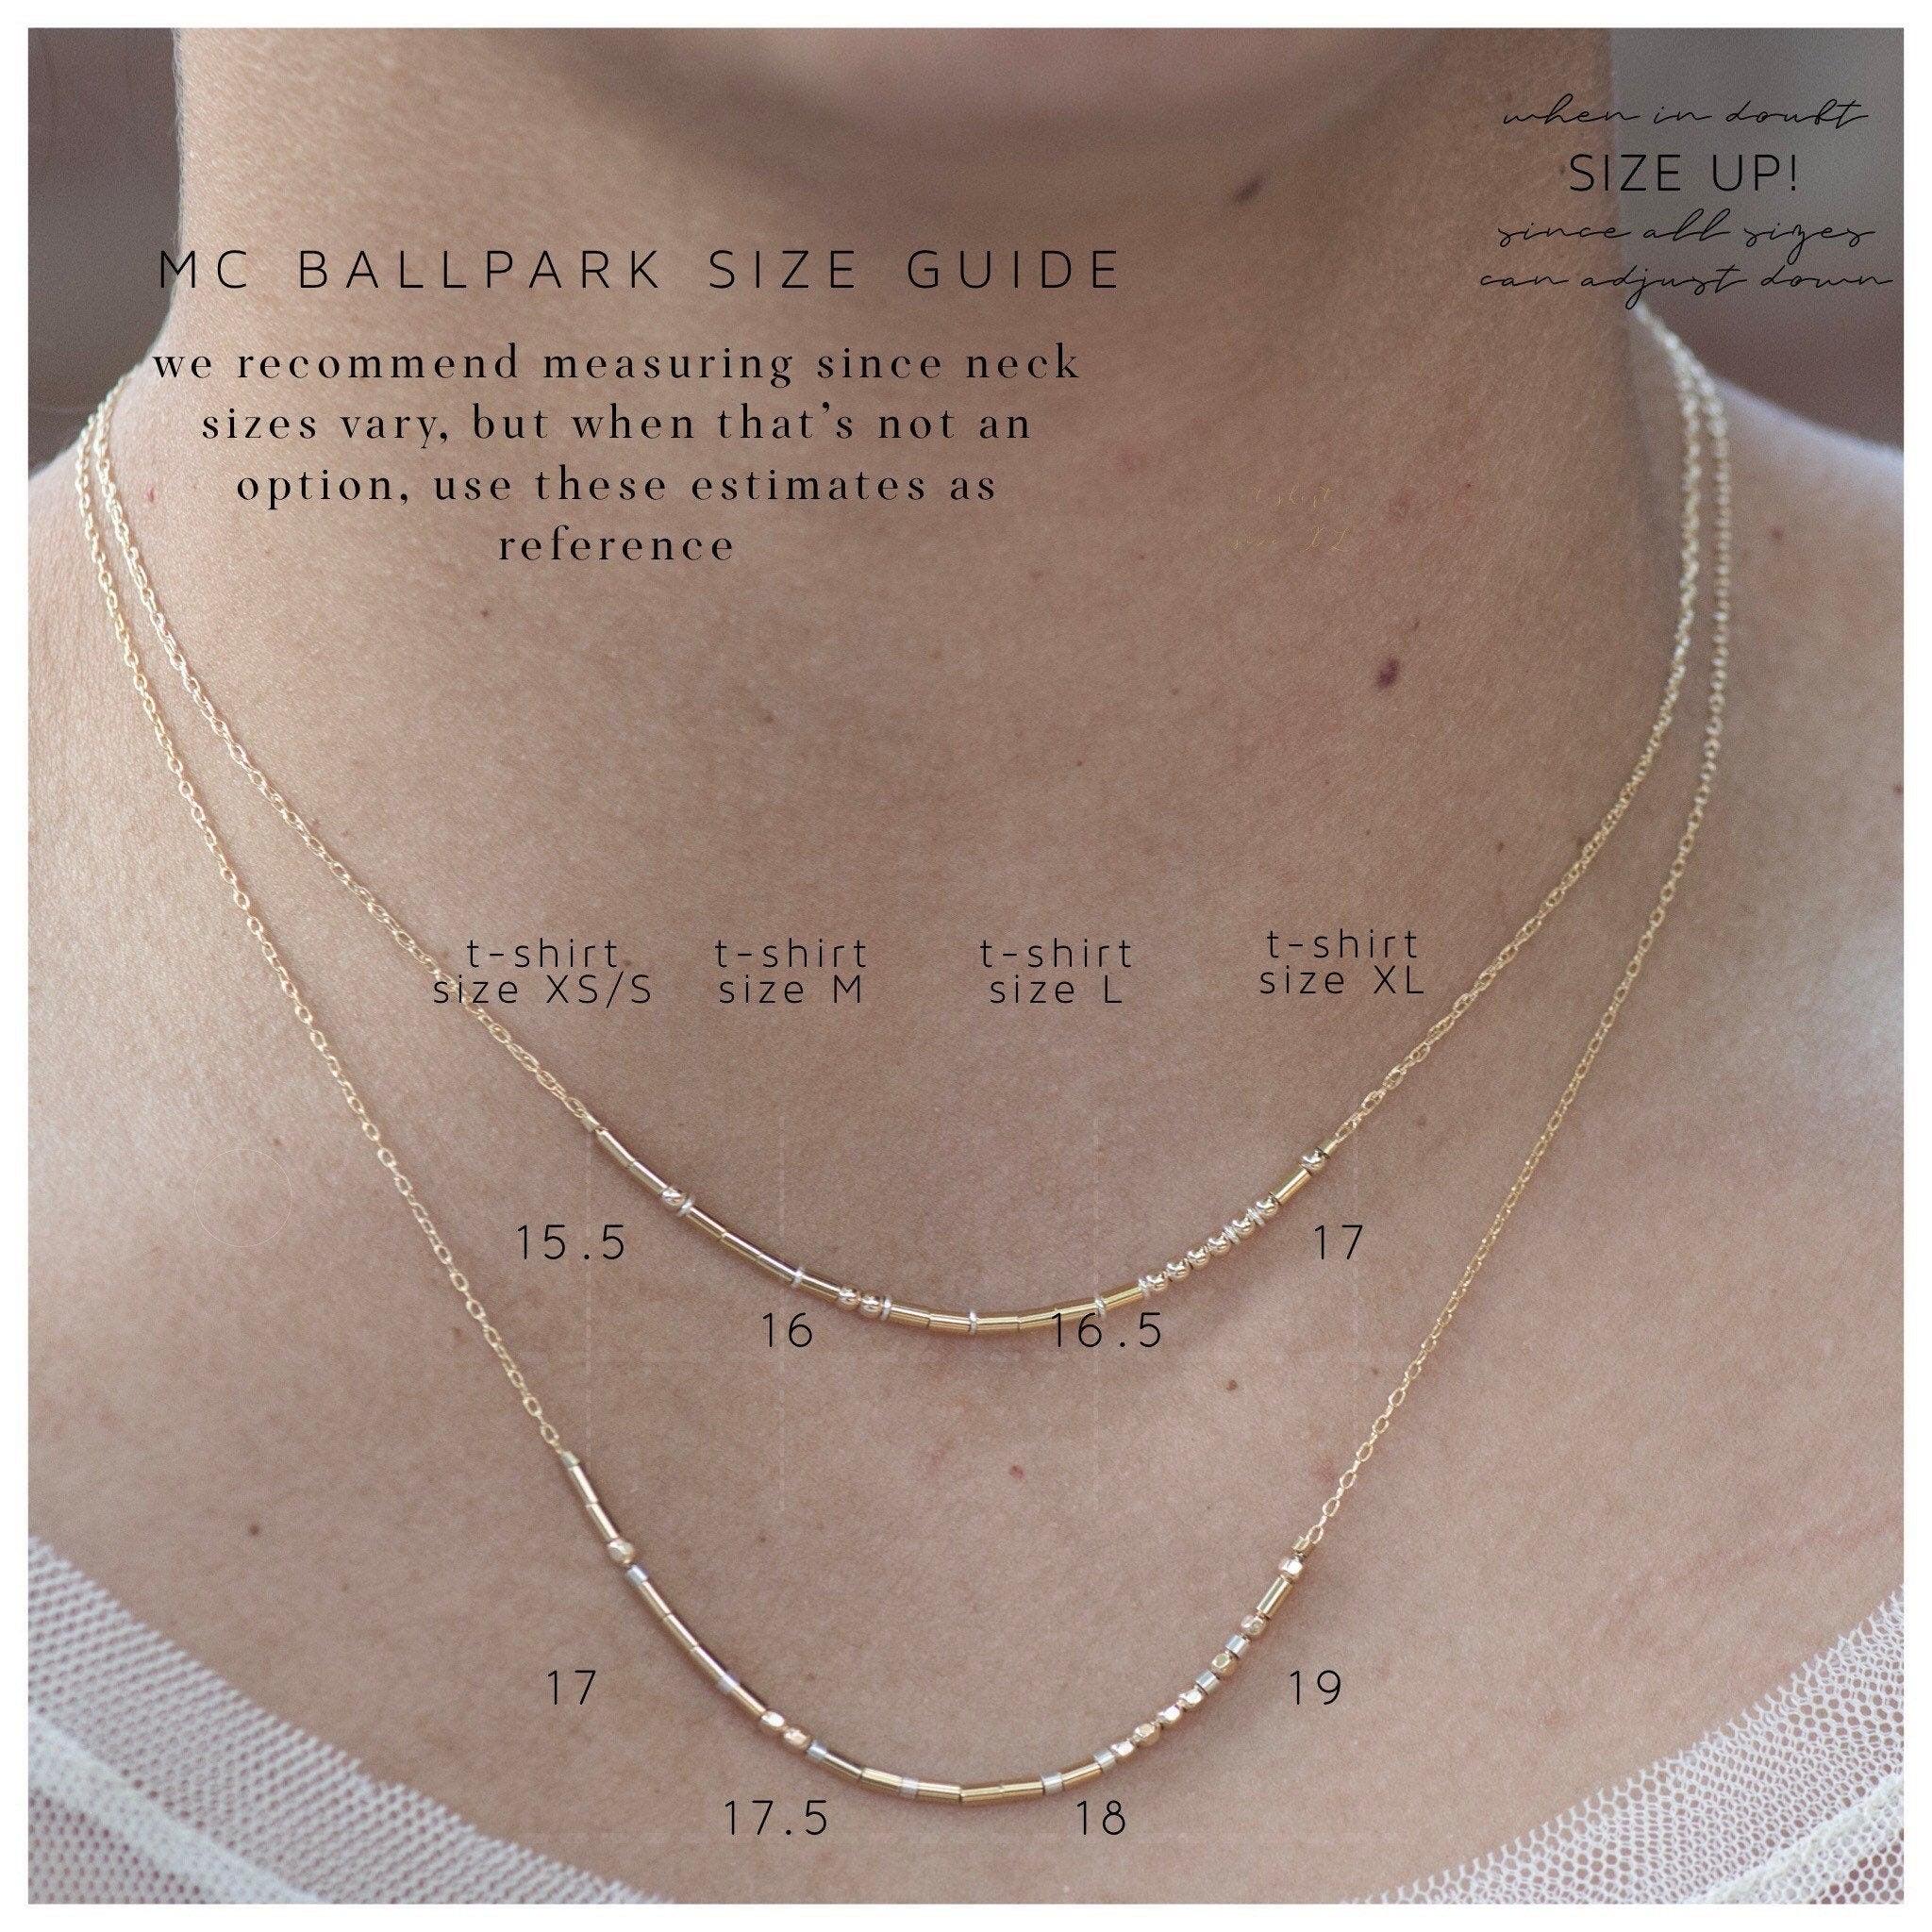 Law School Graduation Gift • Morse Code Lawyer Silver Chain Necklace / Grad Gift / Morivation Dreams & Goals Lawyer Law Student Attorney - Morse and Dainty